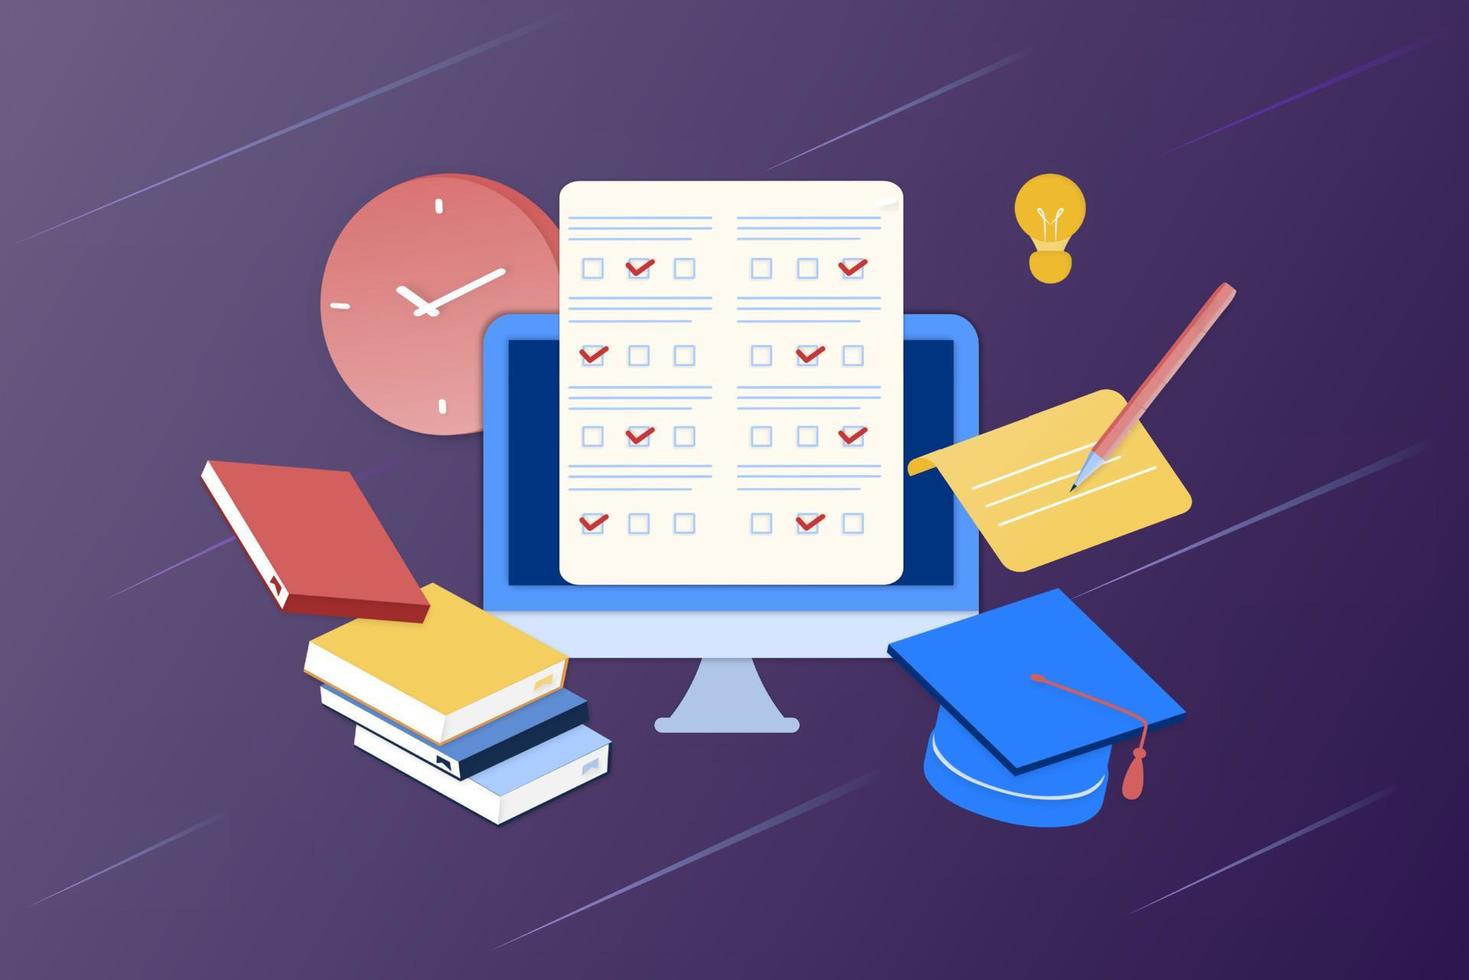 3D isometric landing page template of online examination on computer. Online test, opinion checklist, online education, questionnaire form, survey metaphor, answering internet quiz, computer testing. vector